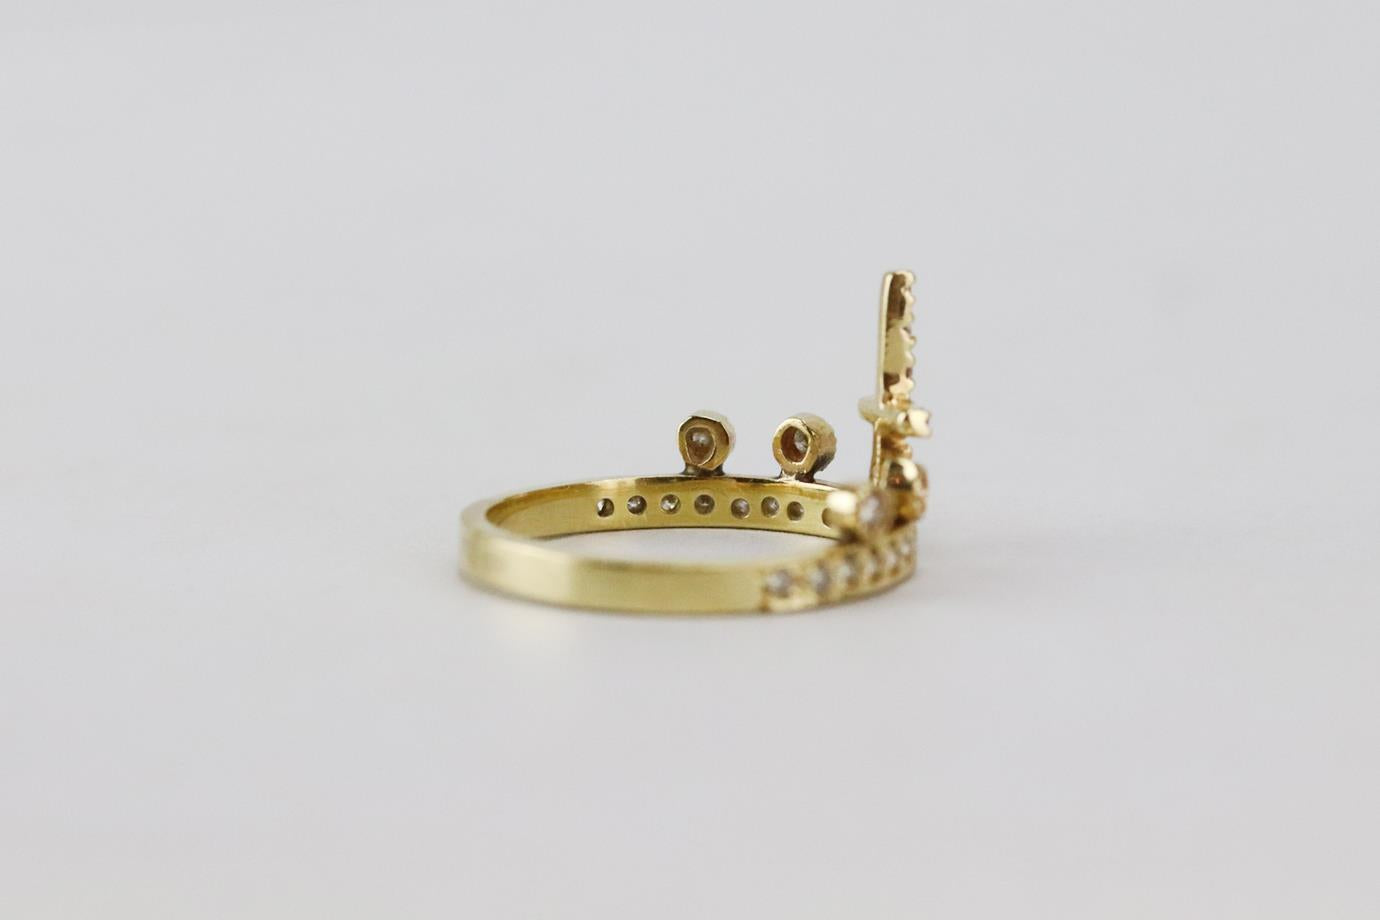 JACQUIE AICHE 14K YELLOW GOLD CROSS CROWN STACK RING 15 MM